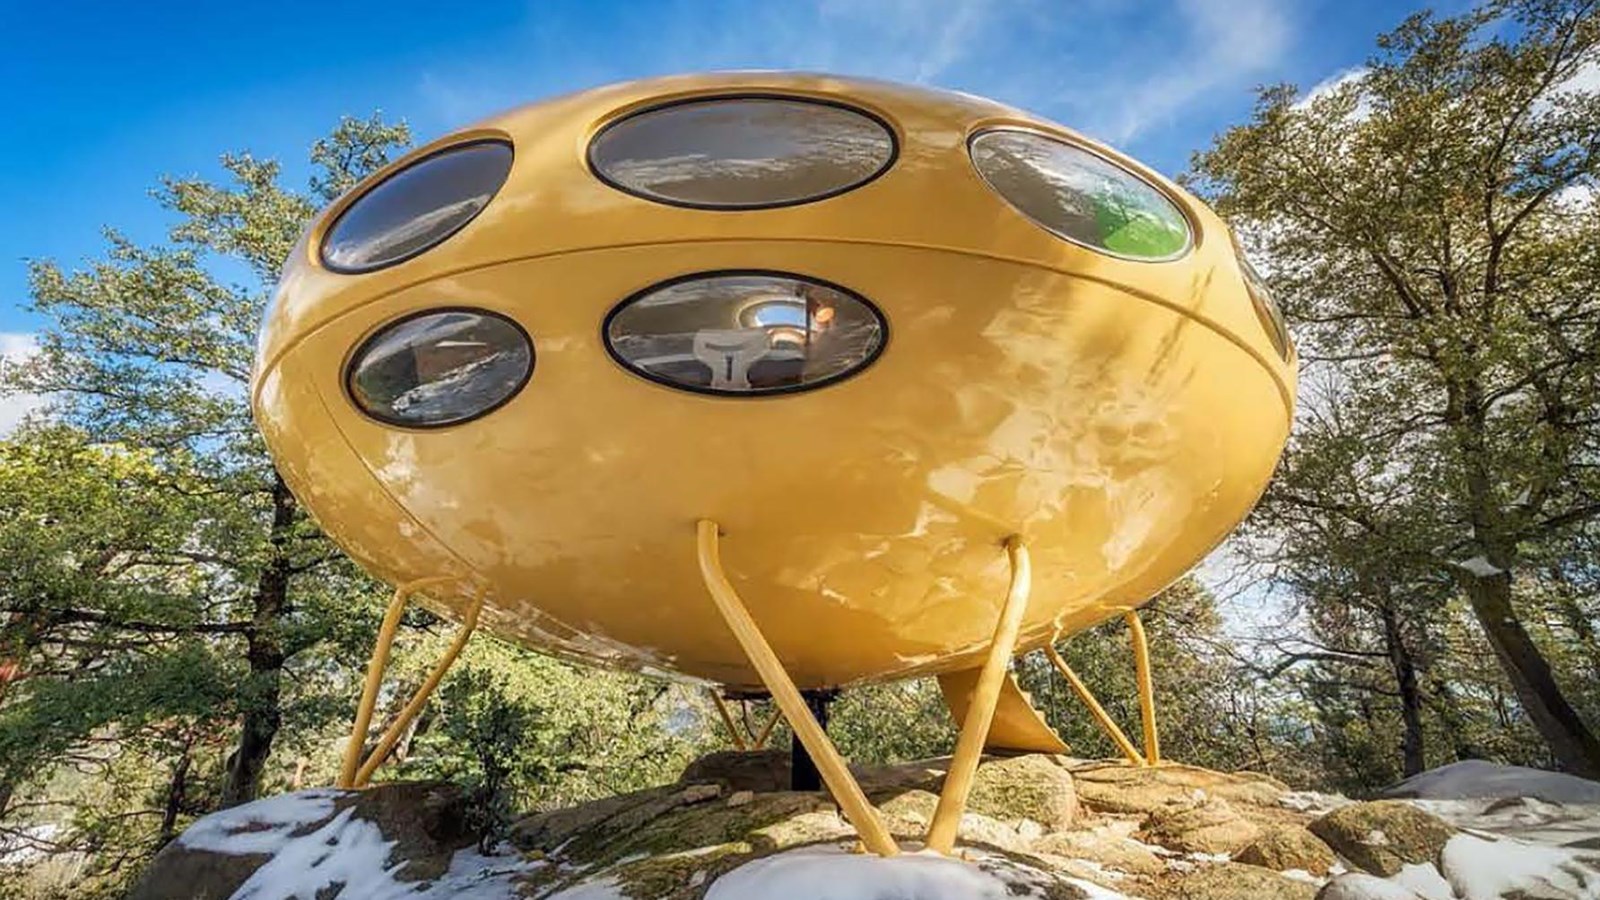 Looks like a yellow flying saucer landed in a snowy wooded area